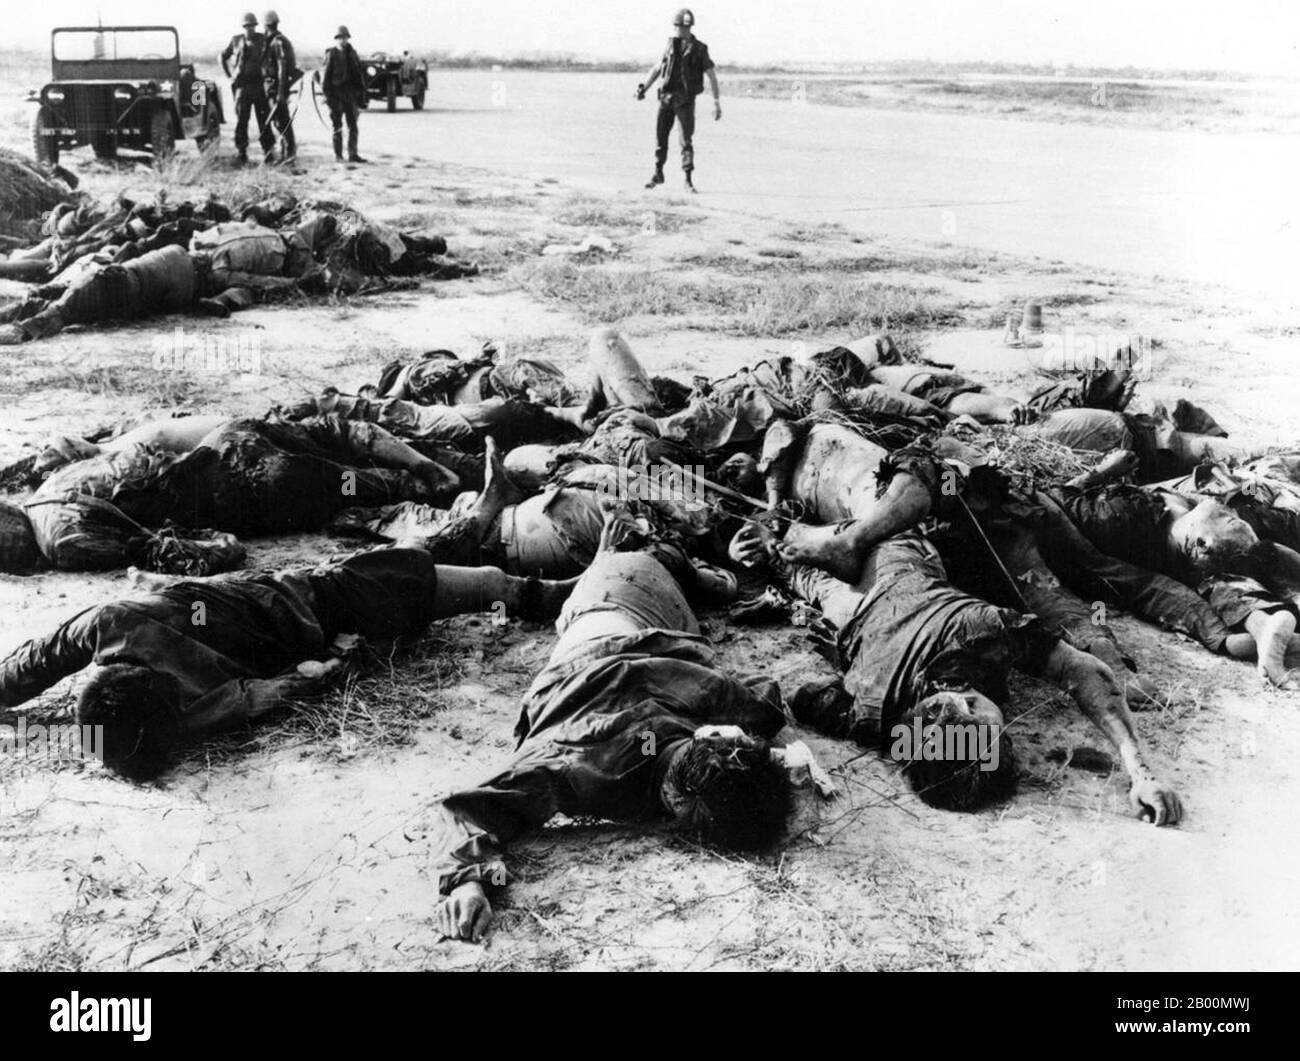 Vietnam: Bodies of dead NLF (Viet Cong) guerrillas lying piled up at Tan Son Nhat Airport, Saigon, February 1968.  The Tet Offensive was a military campaign during the Second Indochina War that began on January 31, 1968. Forces of the National Liberation Front for South Vietnam (NLF, or Viet Cong), and the People's Army of Vietnam (the North Vietnamese army), fought against the forces of the Republic of Vietnam (South Vietnam), the United States, and their allies. Stock Photo